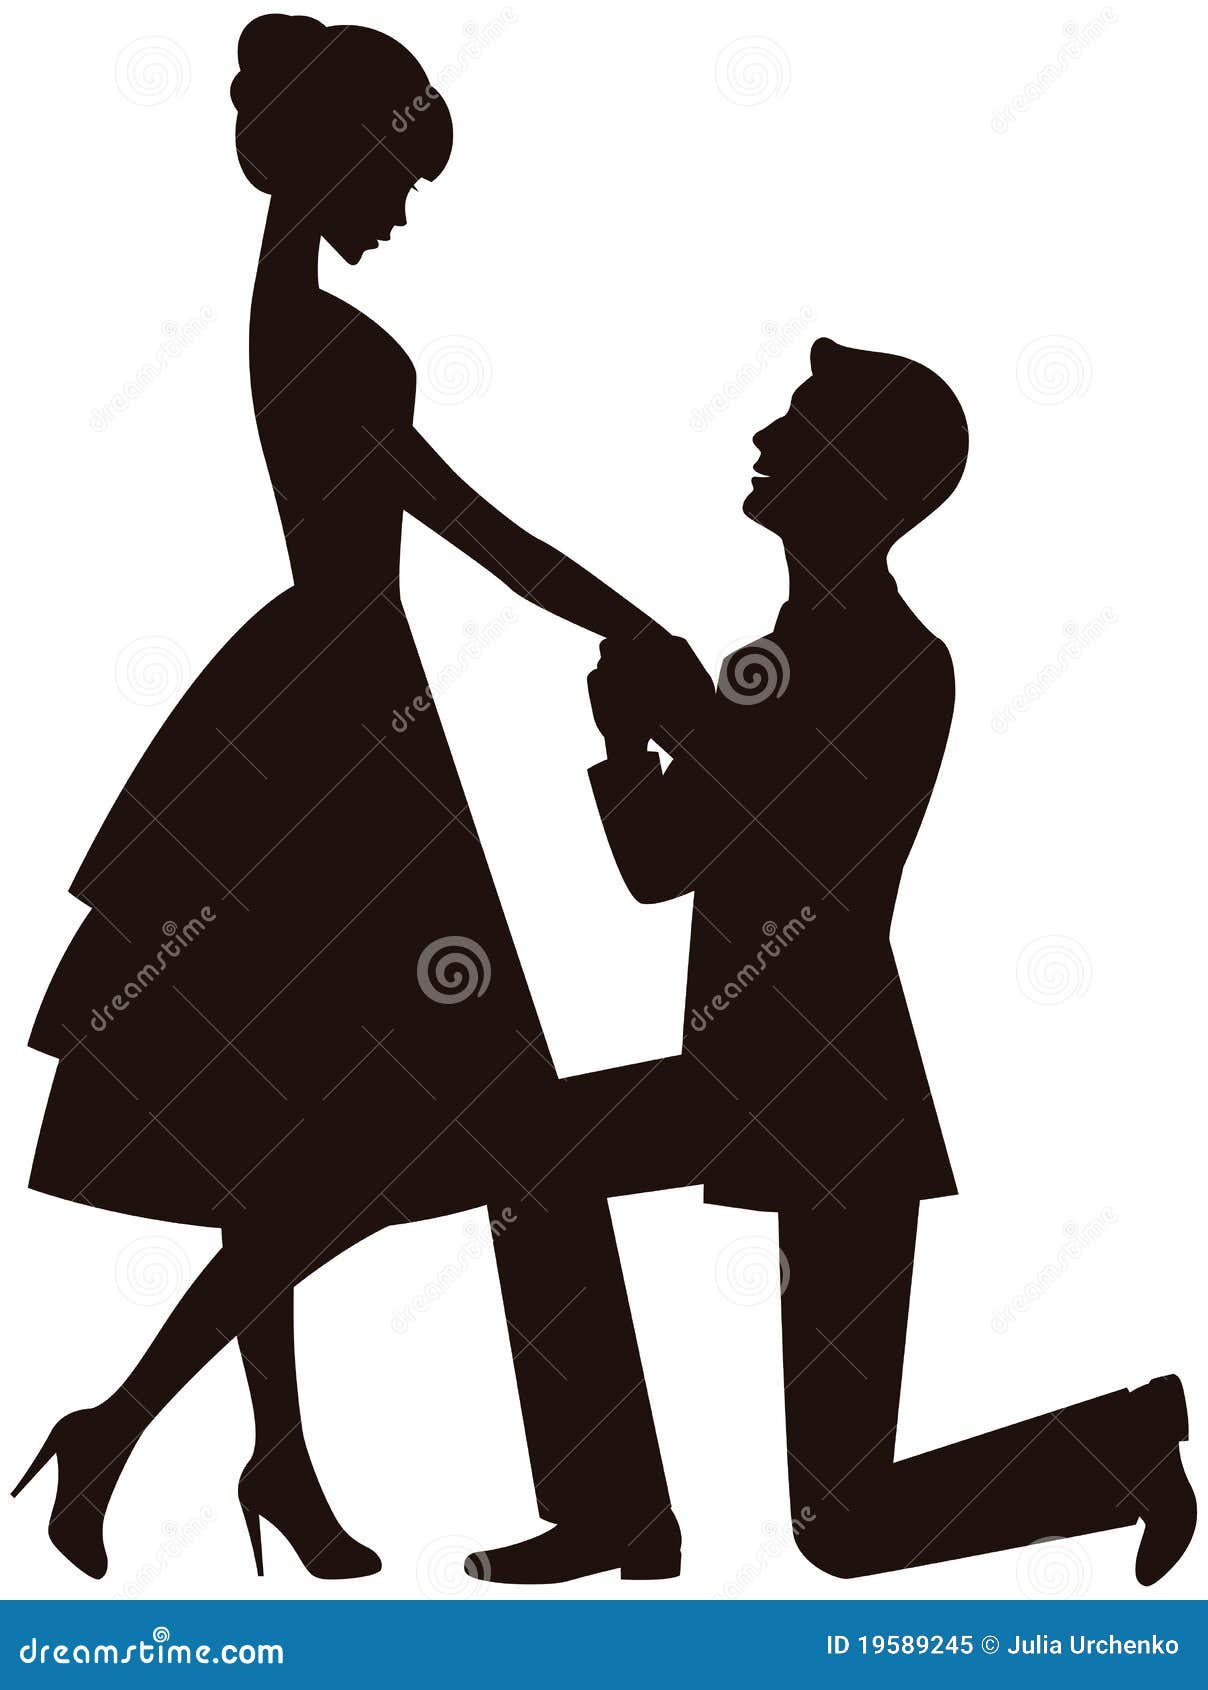 clipart man and woman in love - photo #41